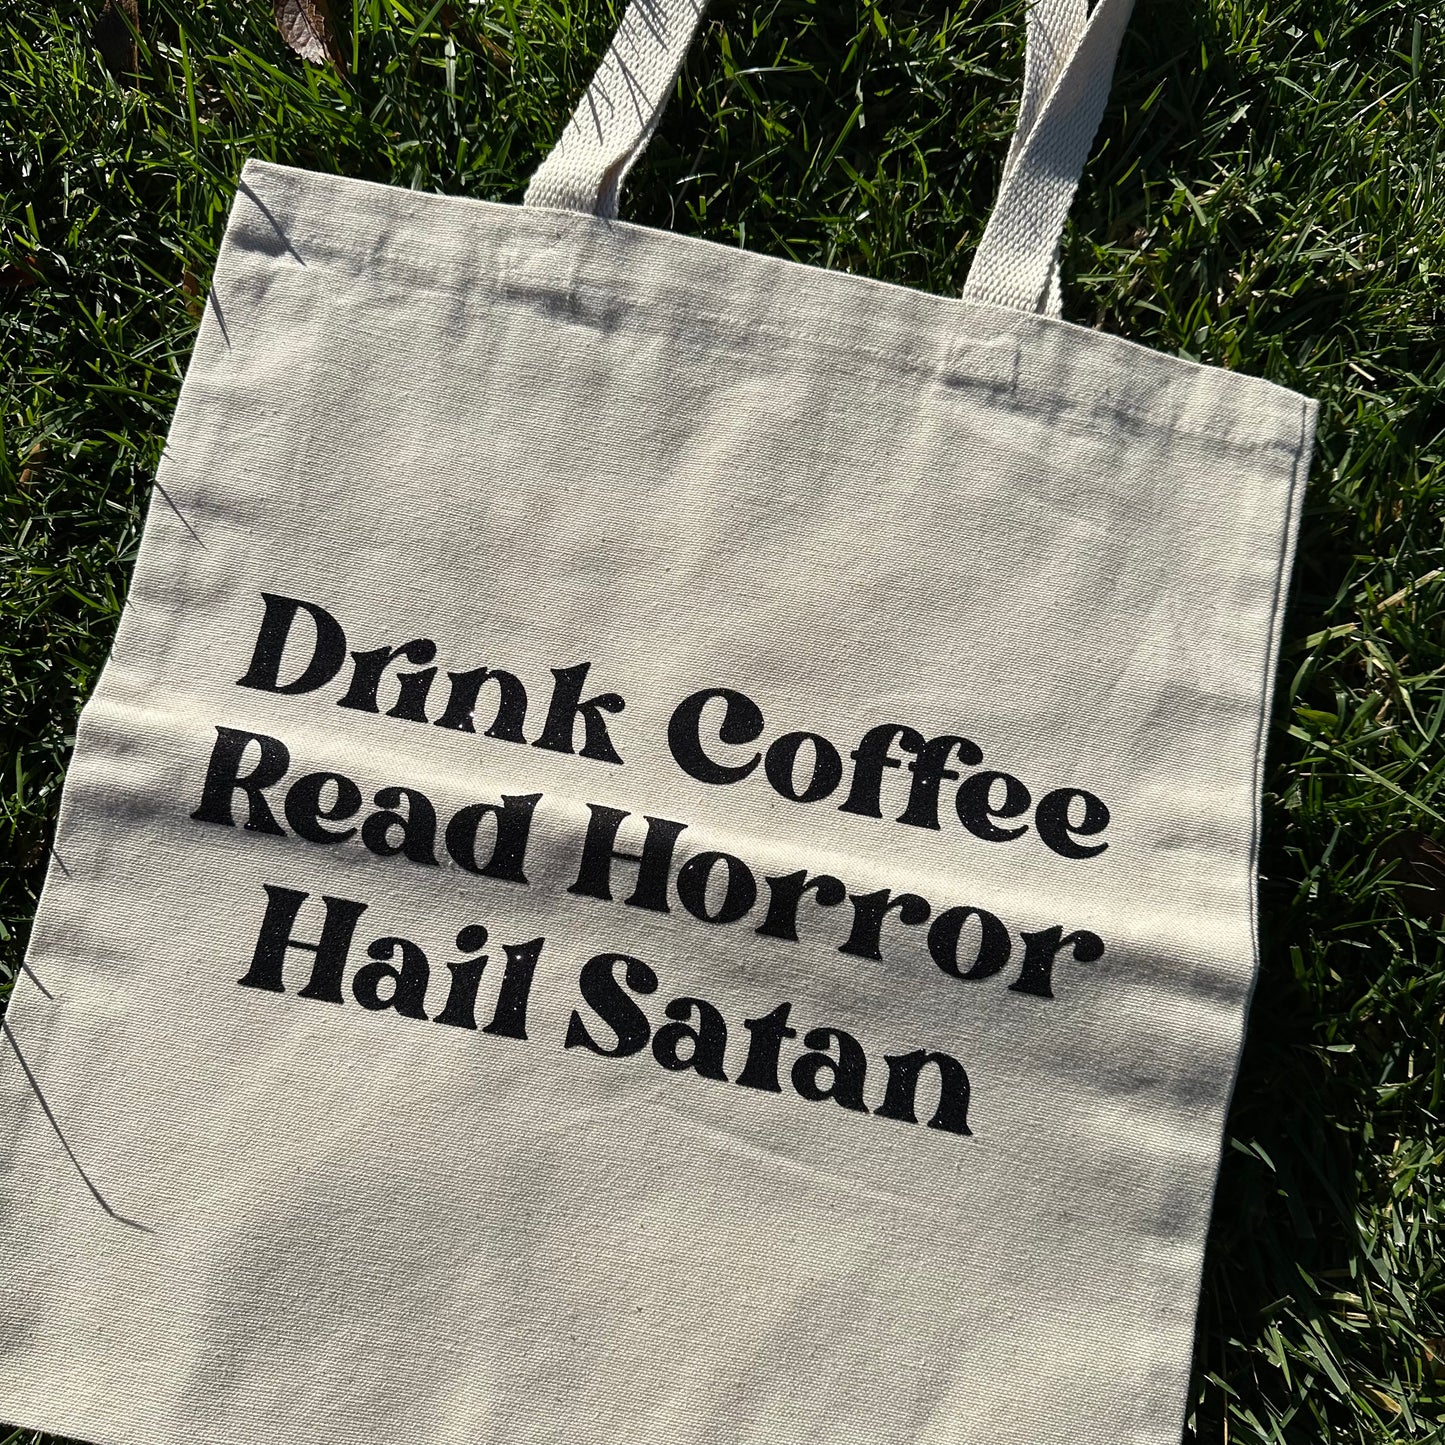 Drink, Read, Hail Tote